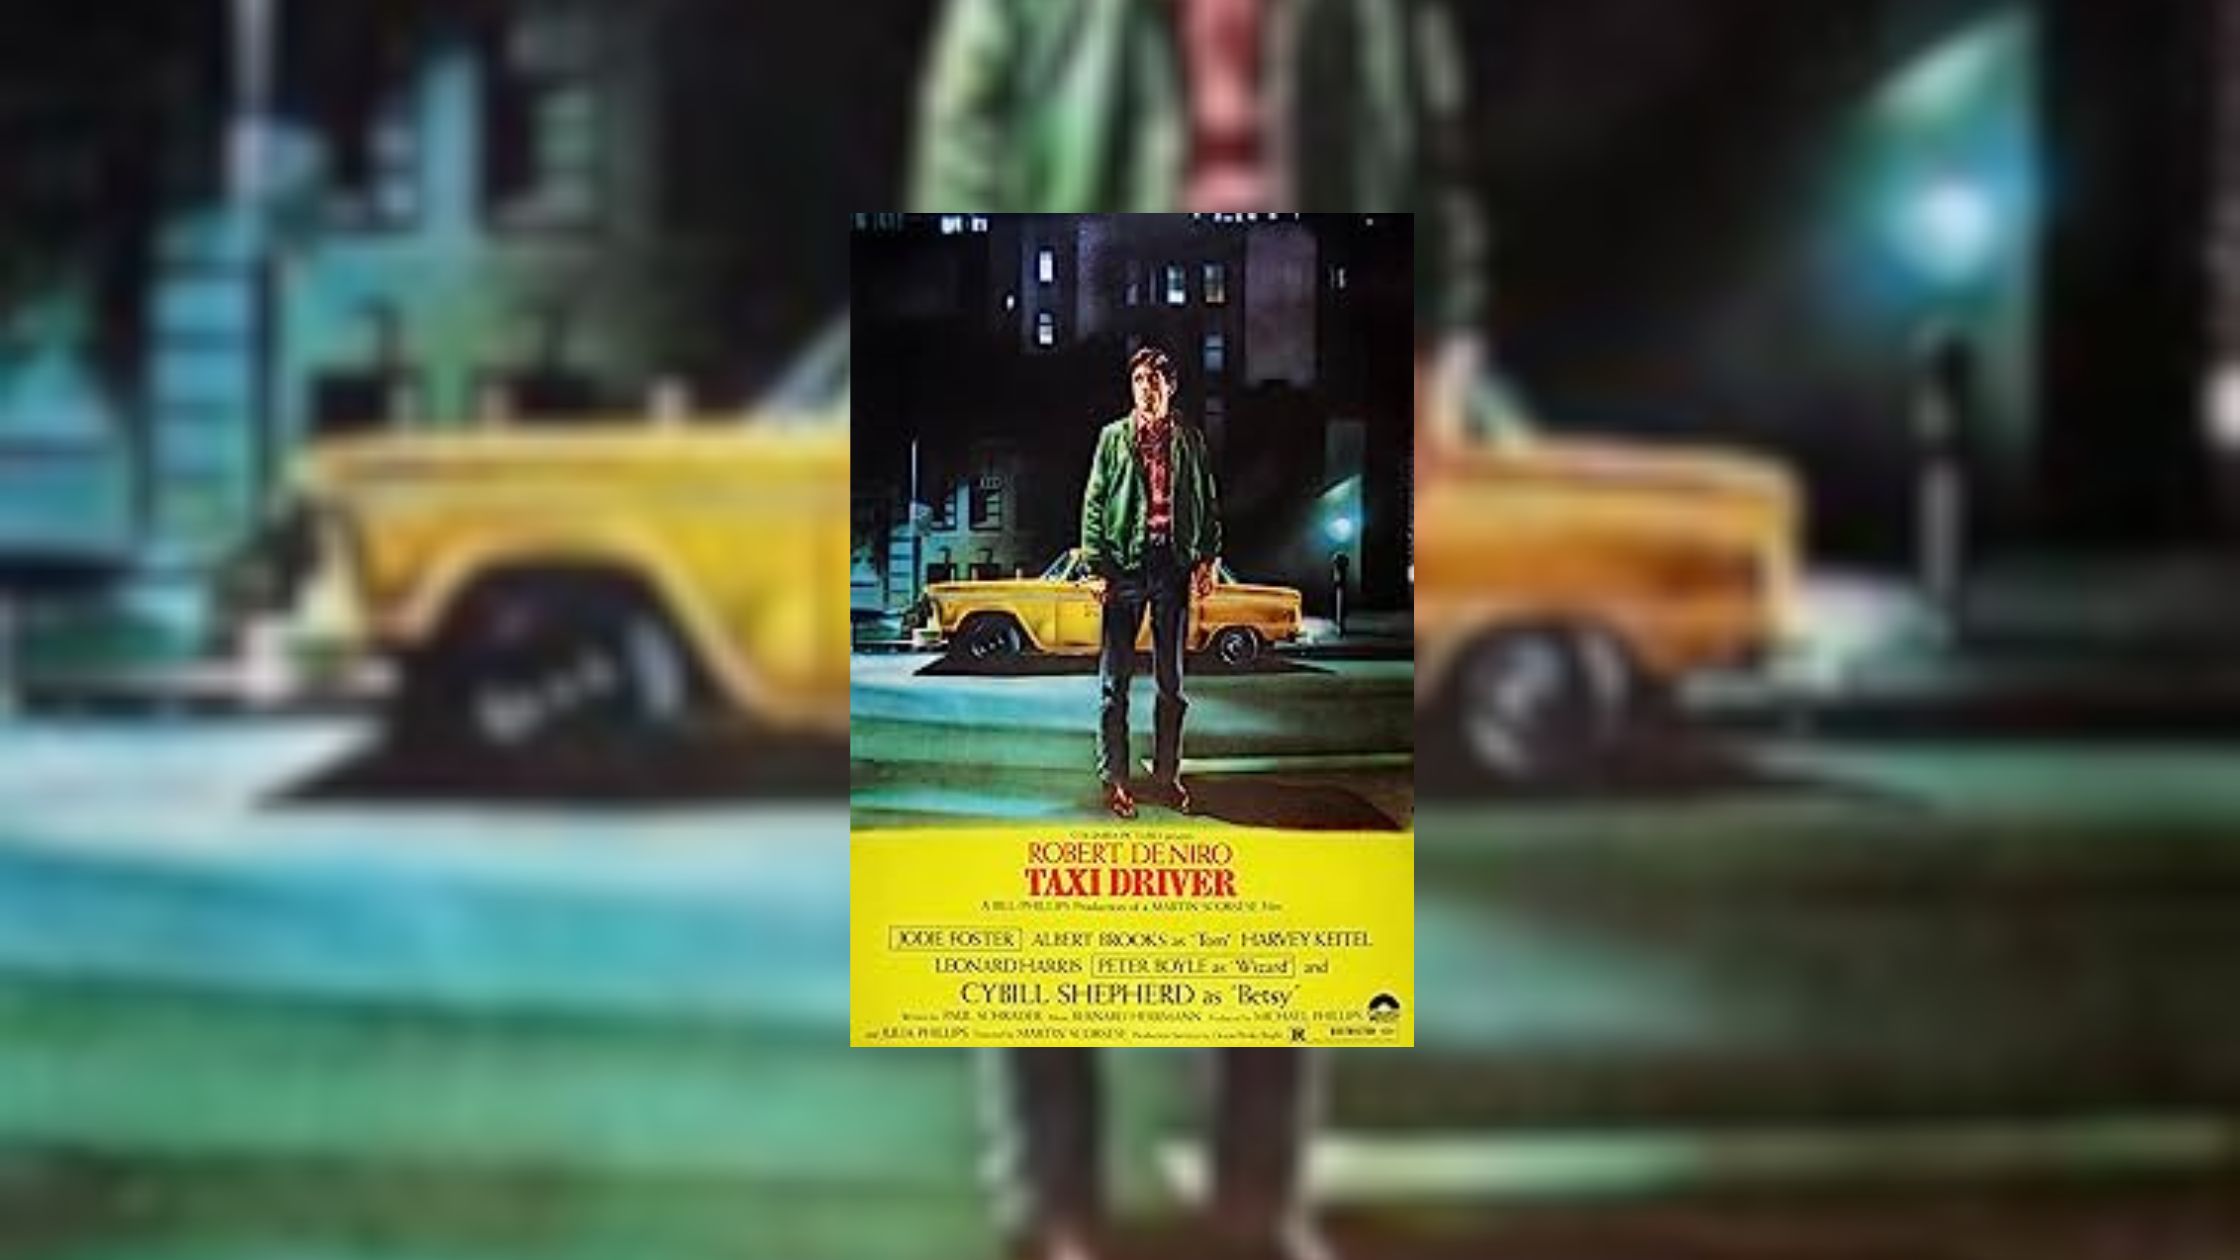 Poster from the film Taxi Driver released in 1976.